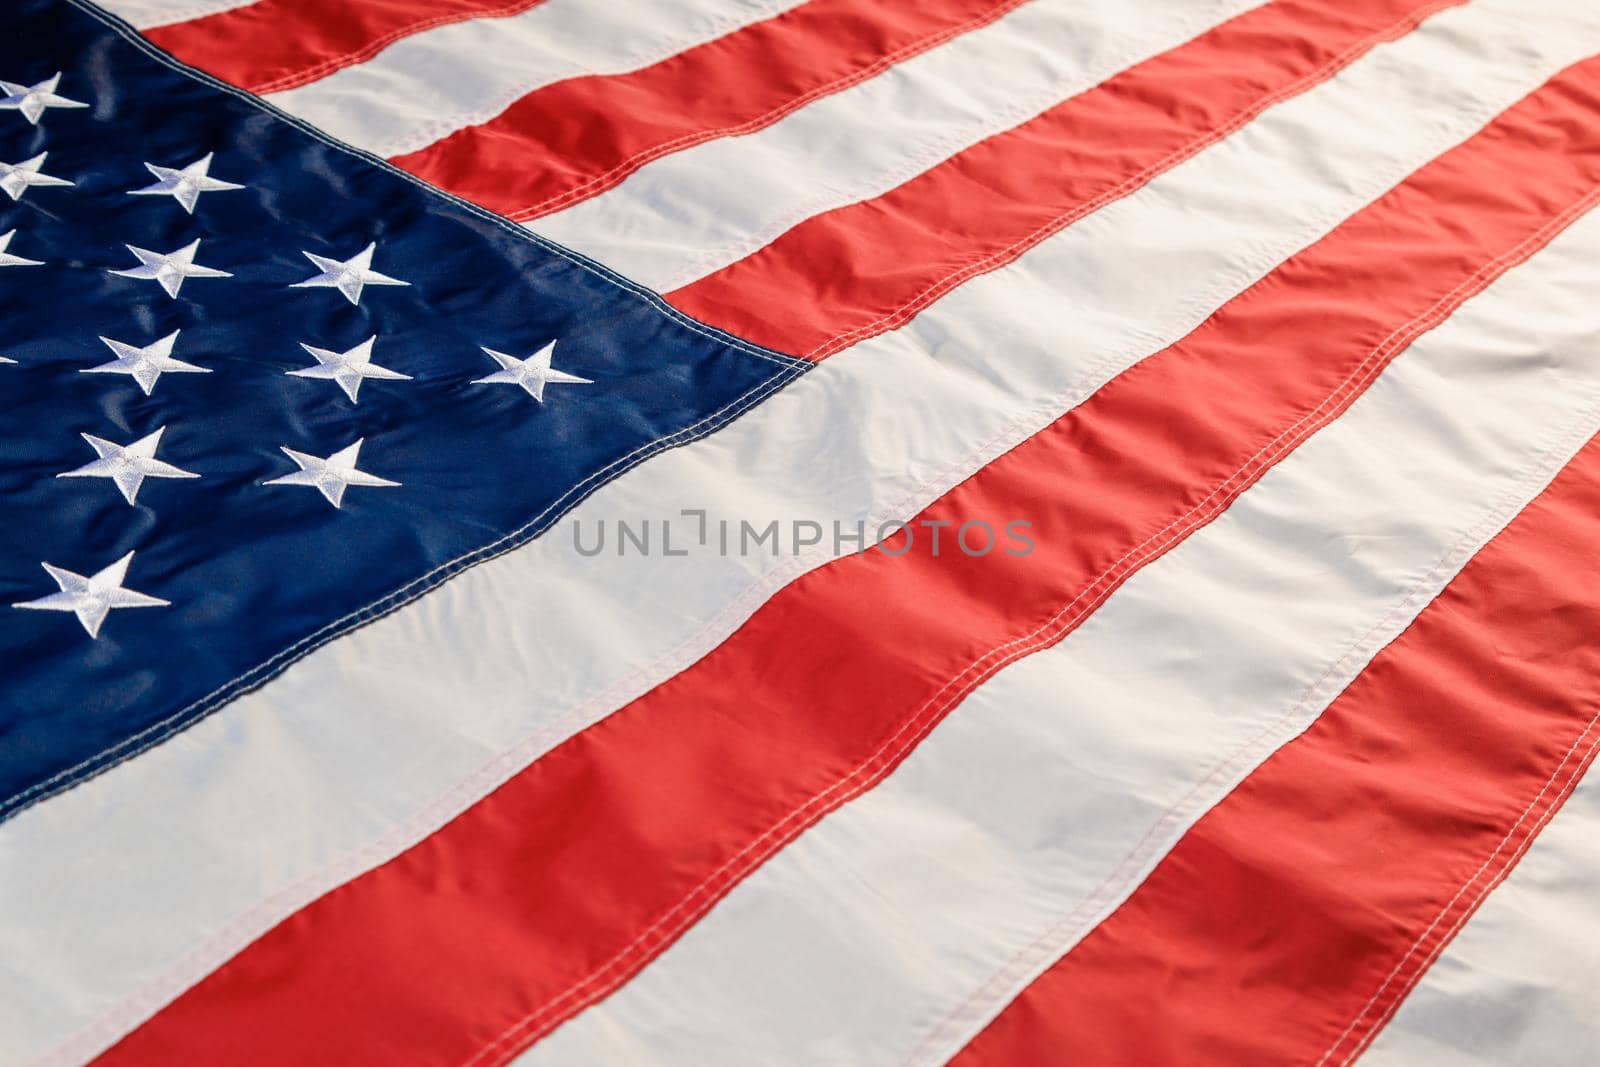 full-frame background of nylon sewed and embroided United States national flag by z1b